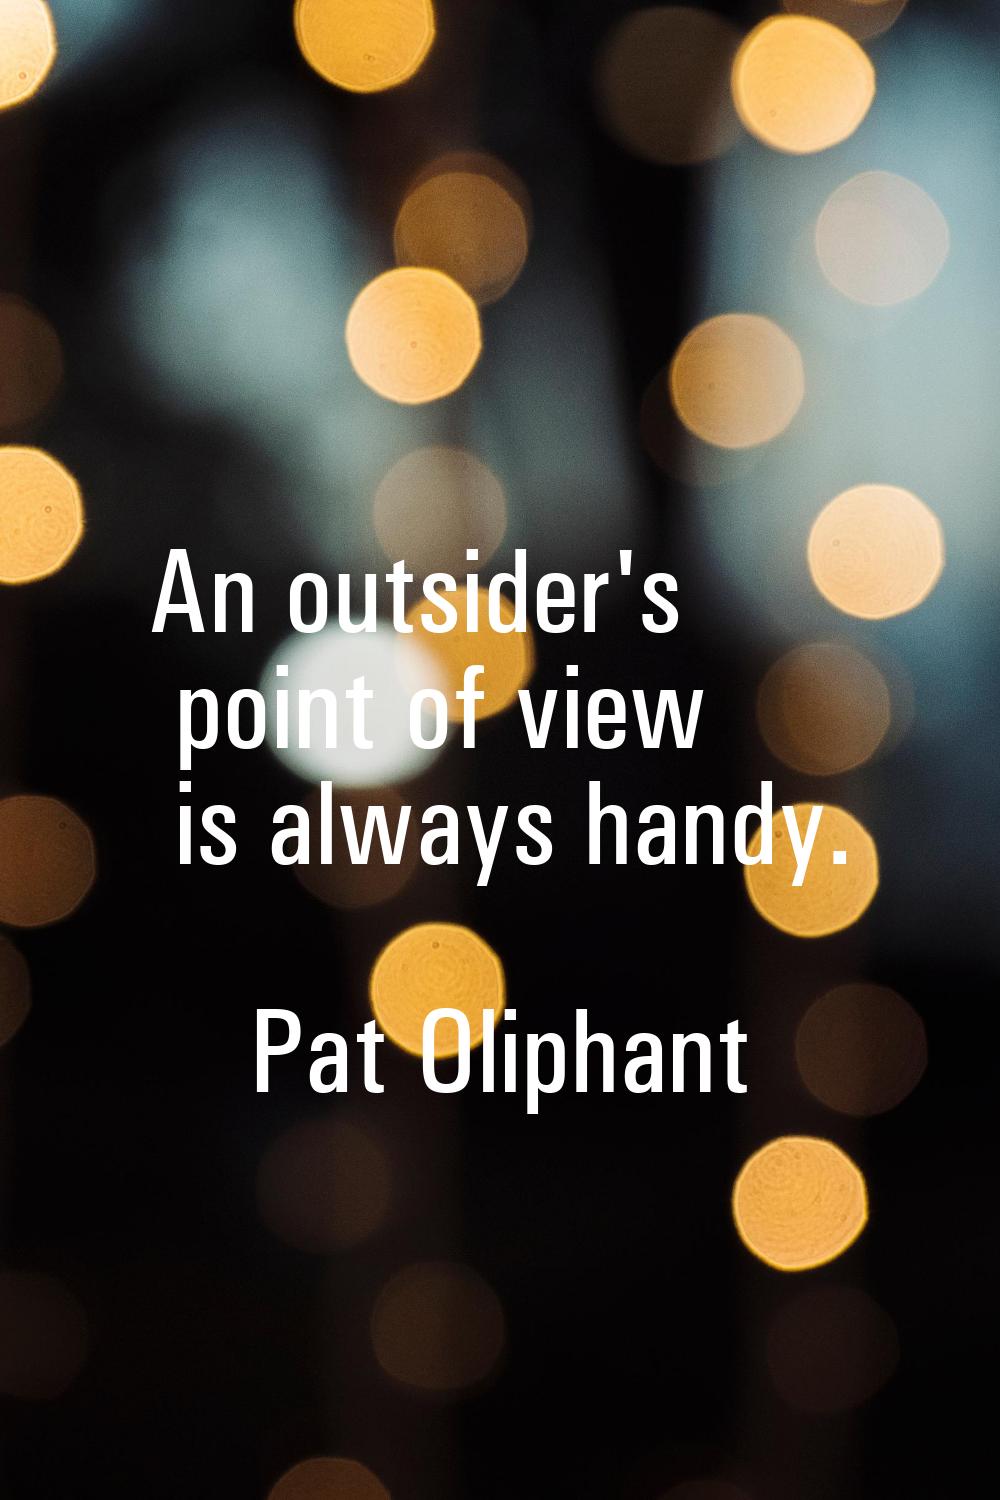 An outsider's point of view is always handy.